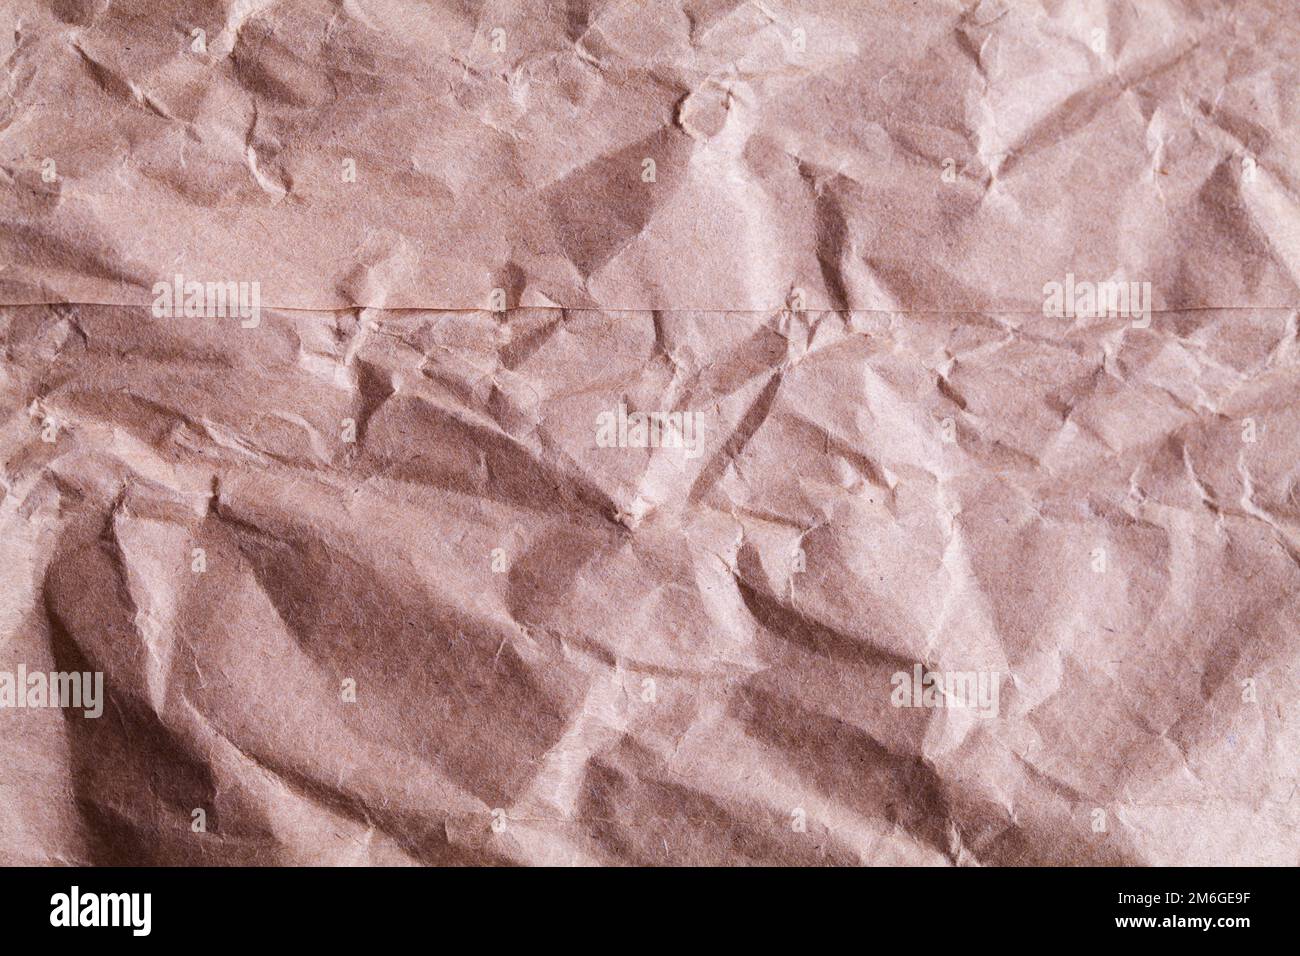 Brown Paper Bag Wrinkled Texture Close Up Background. Stock Photo